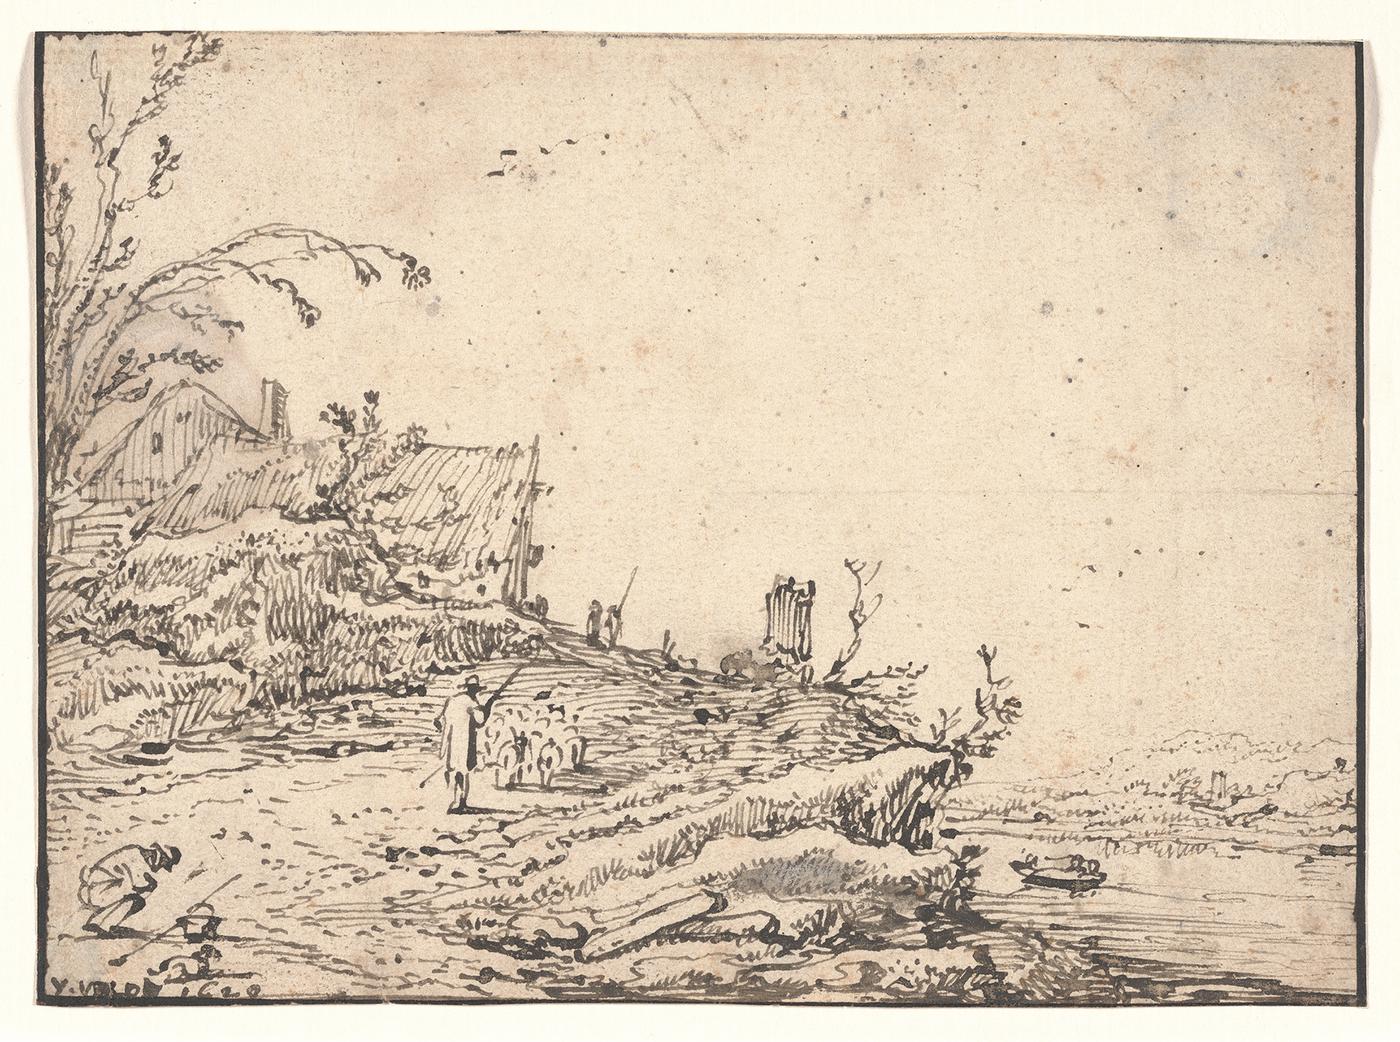 Drawing of a river landscape